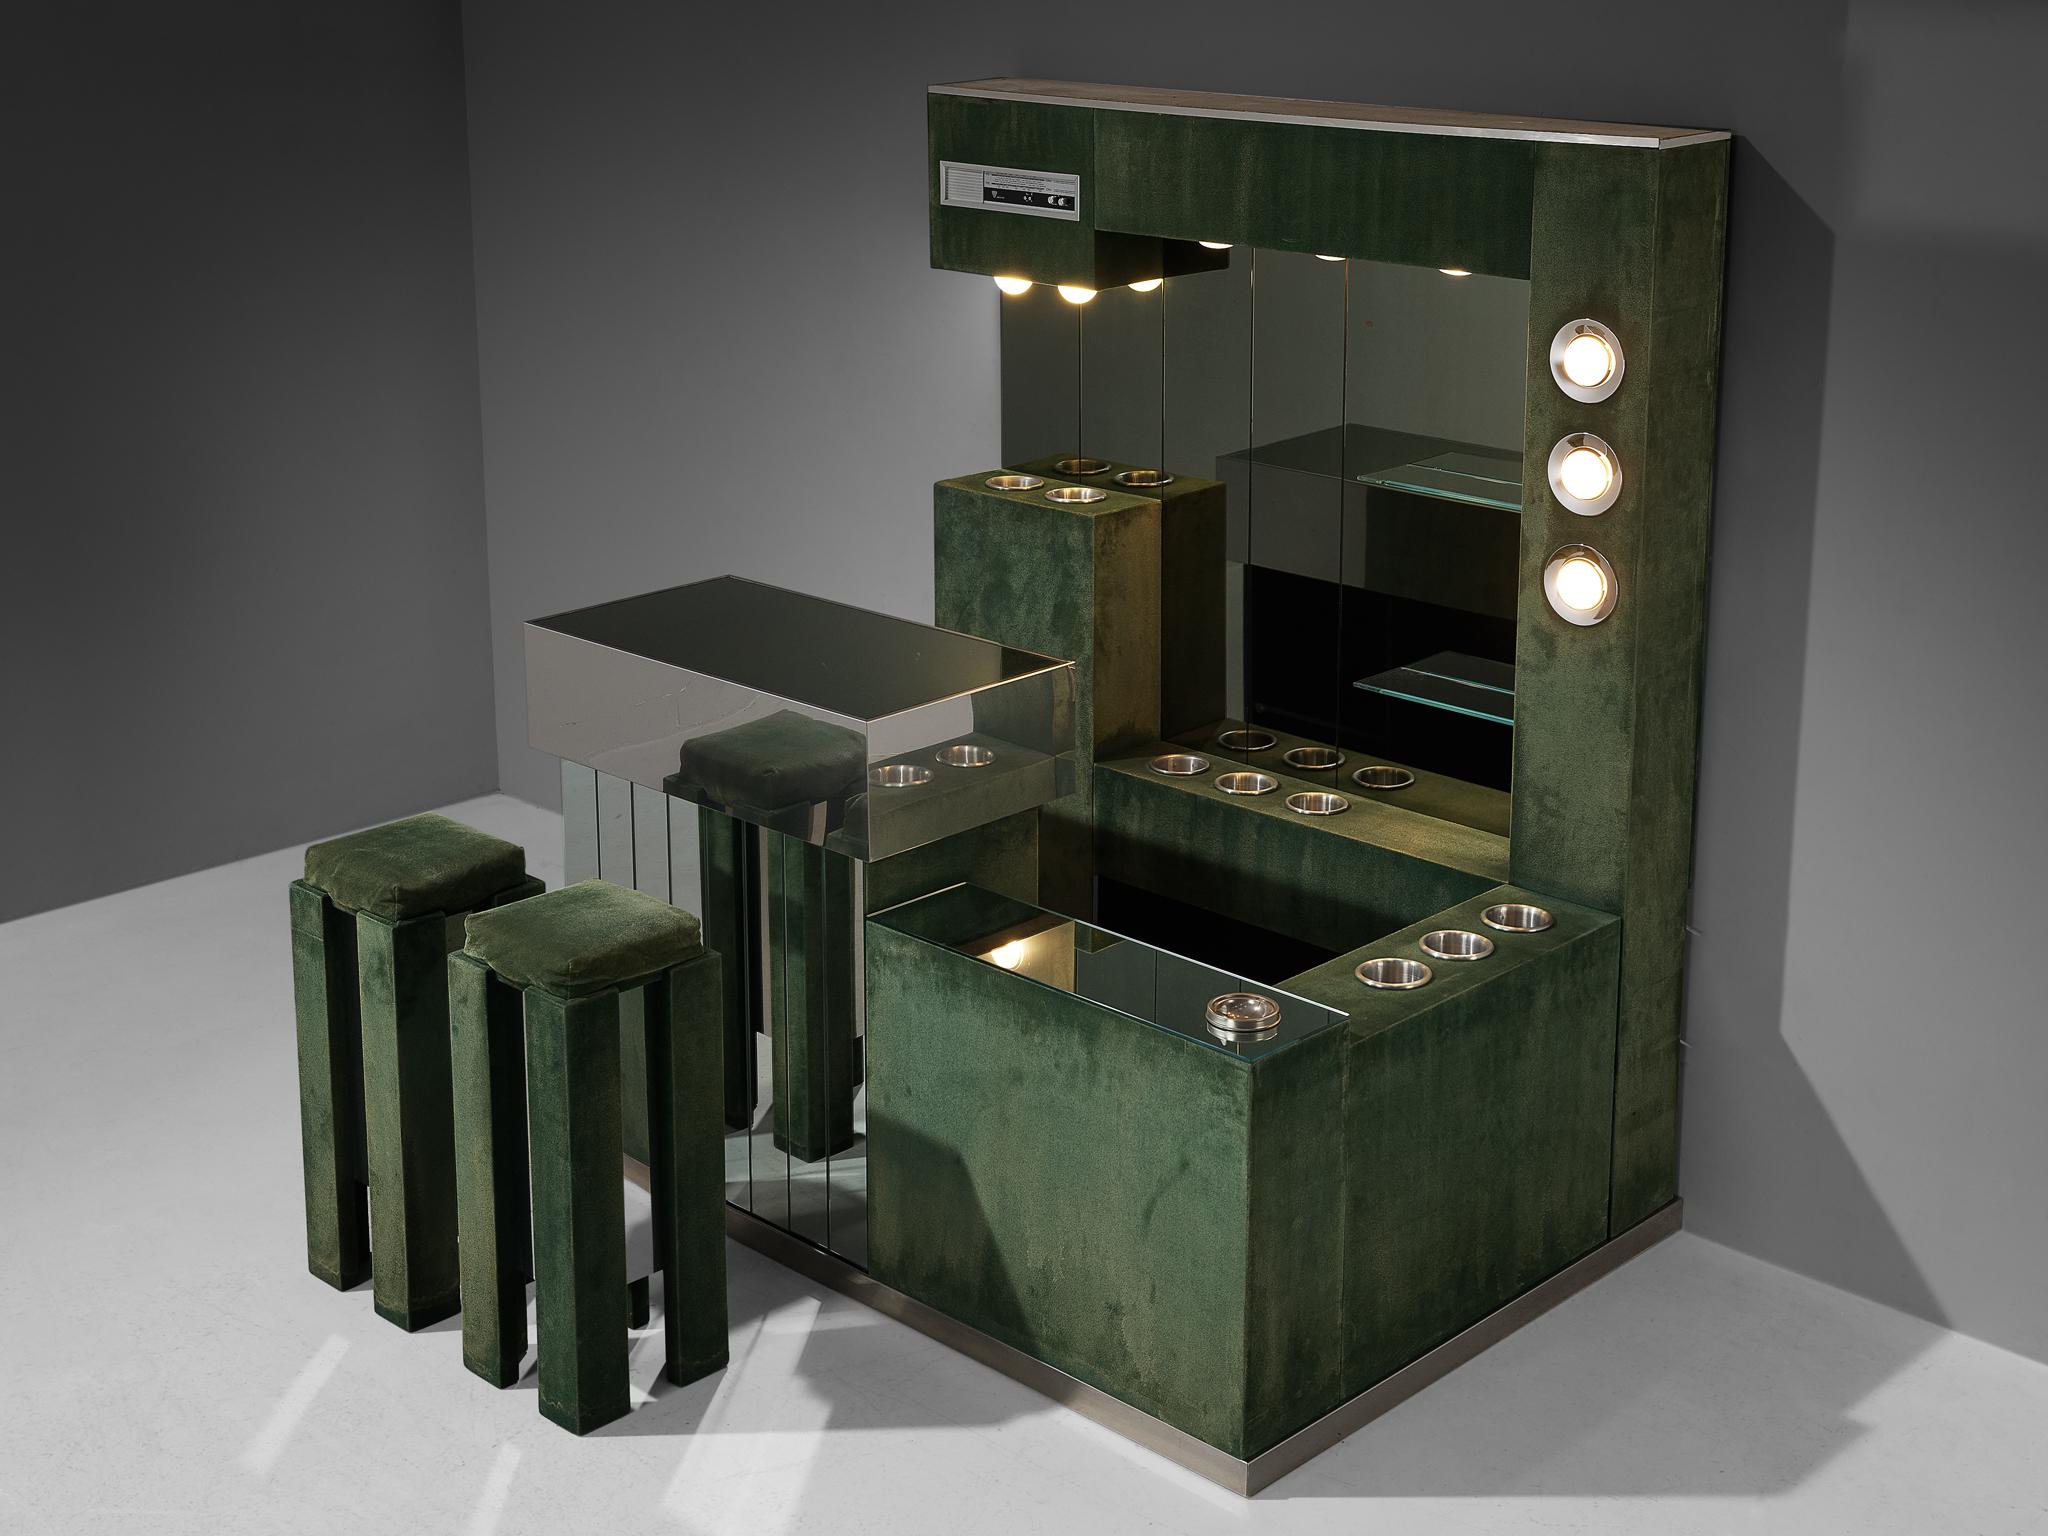 Cocktail bar and bar stools, velvet, steel, aluminium, plastic, mirror, Italy, 1970s

Hollywood Regency cocktail bar in the style of Willy Rizzo. The set includes a counter element and cabinet, with chrome and velvet details in green. The counter